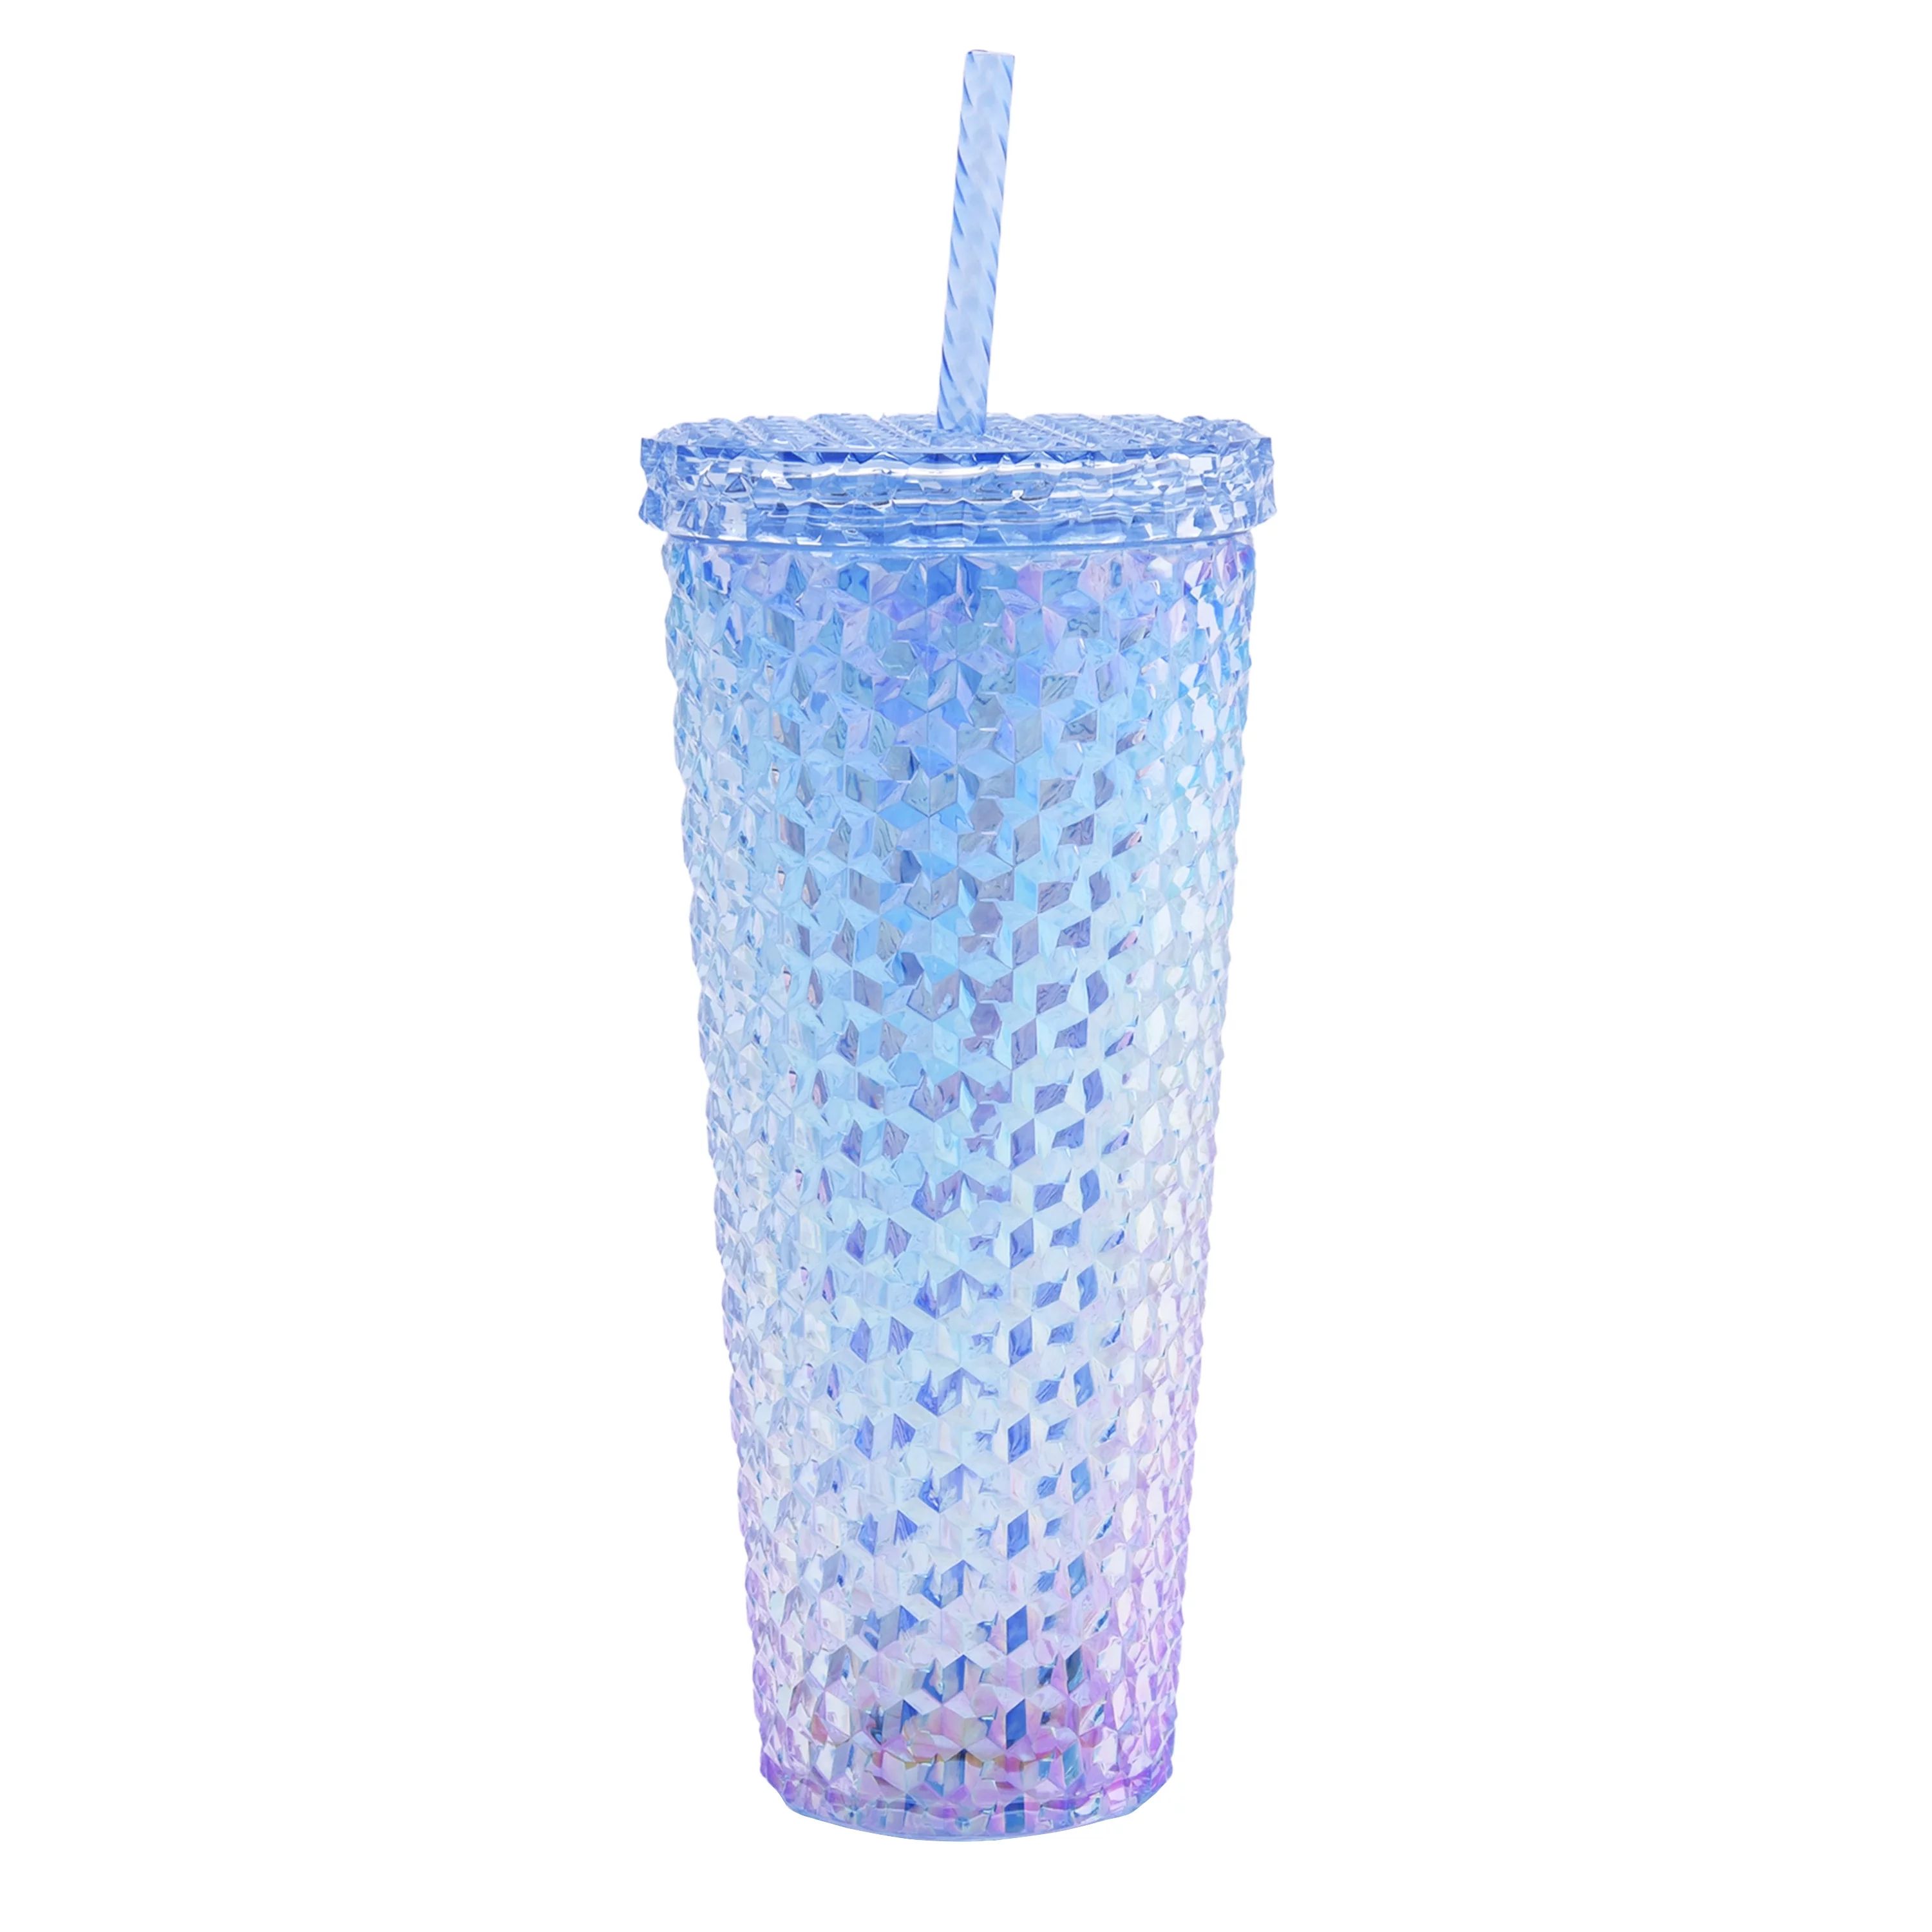 Mainstays 26-Ounce Acrylic Iridescent Textured Tumbler with Straw, Blue | Walmart (US)